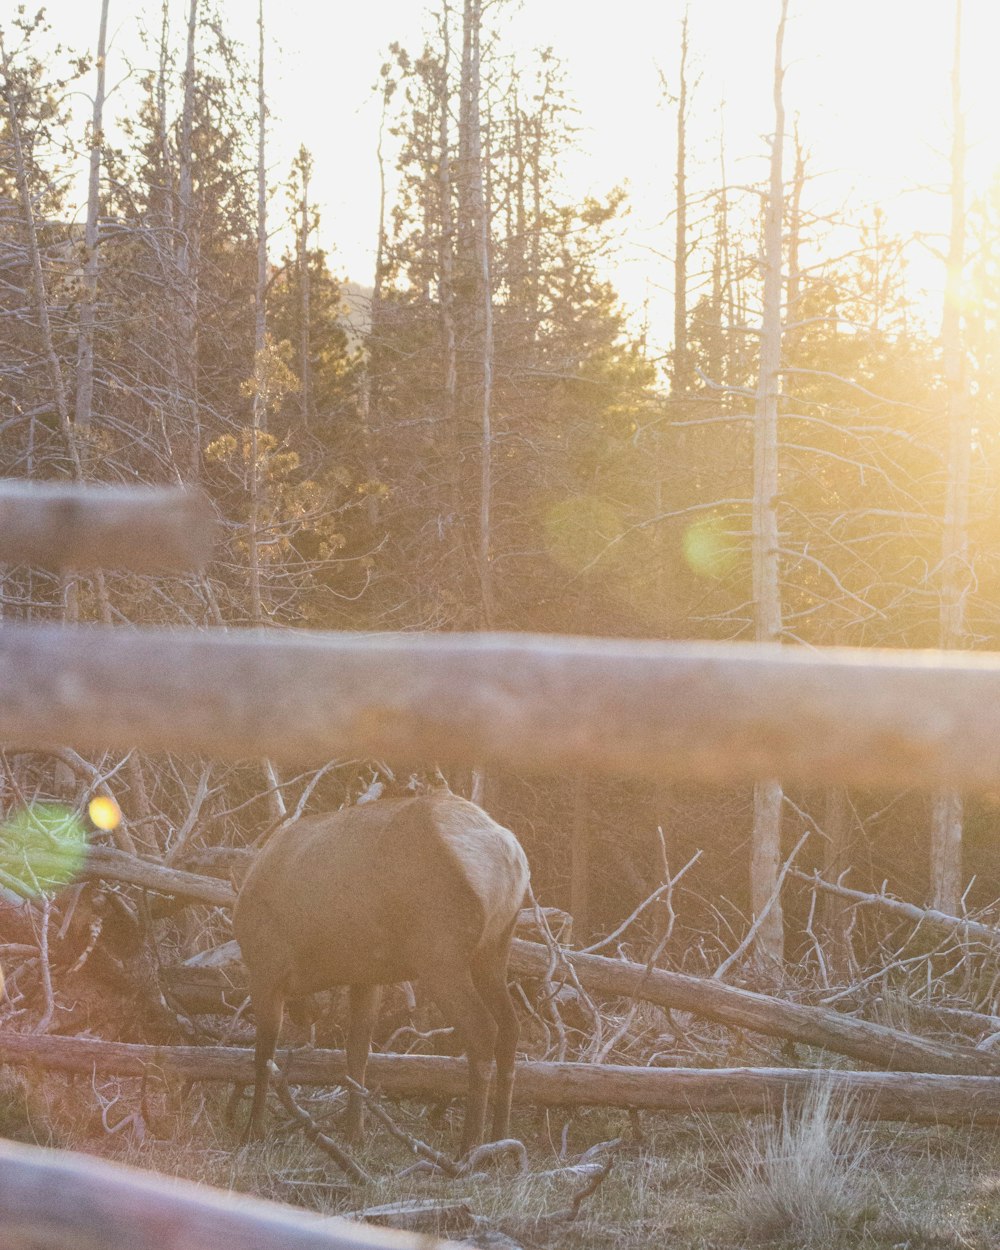 a moose standing on a fence